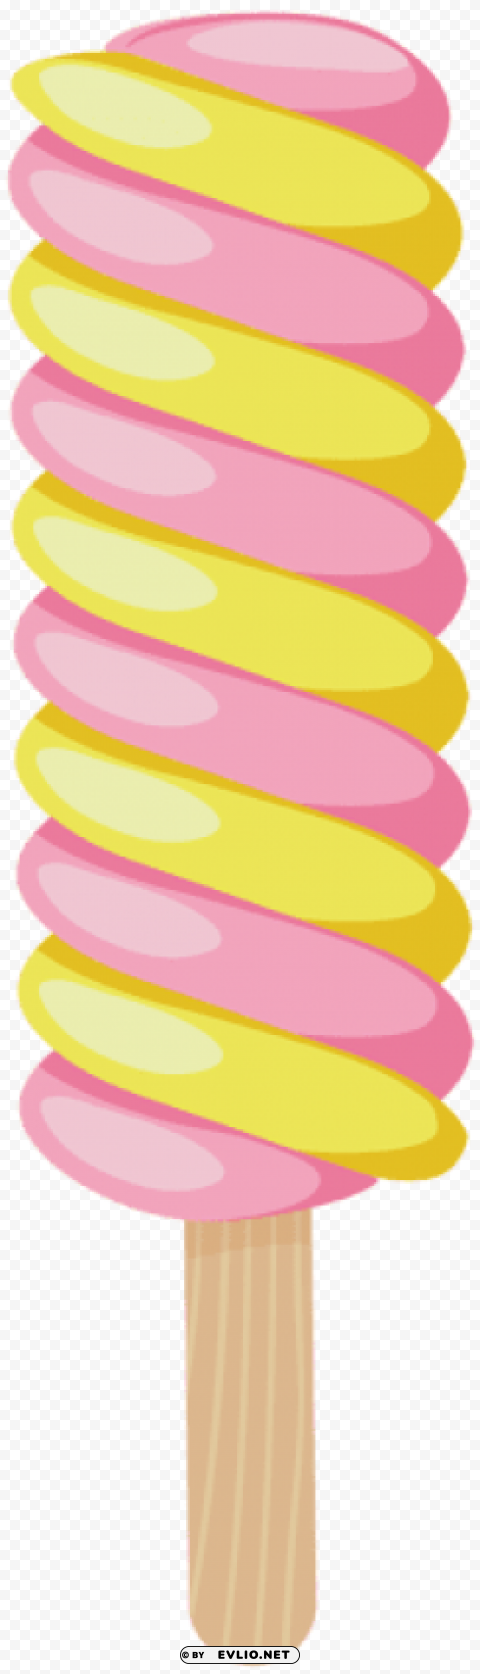 Ice Cream Swirl PNG Transparent Images For Printing